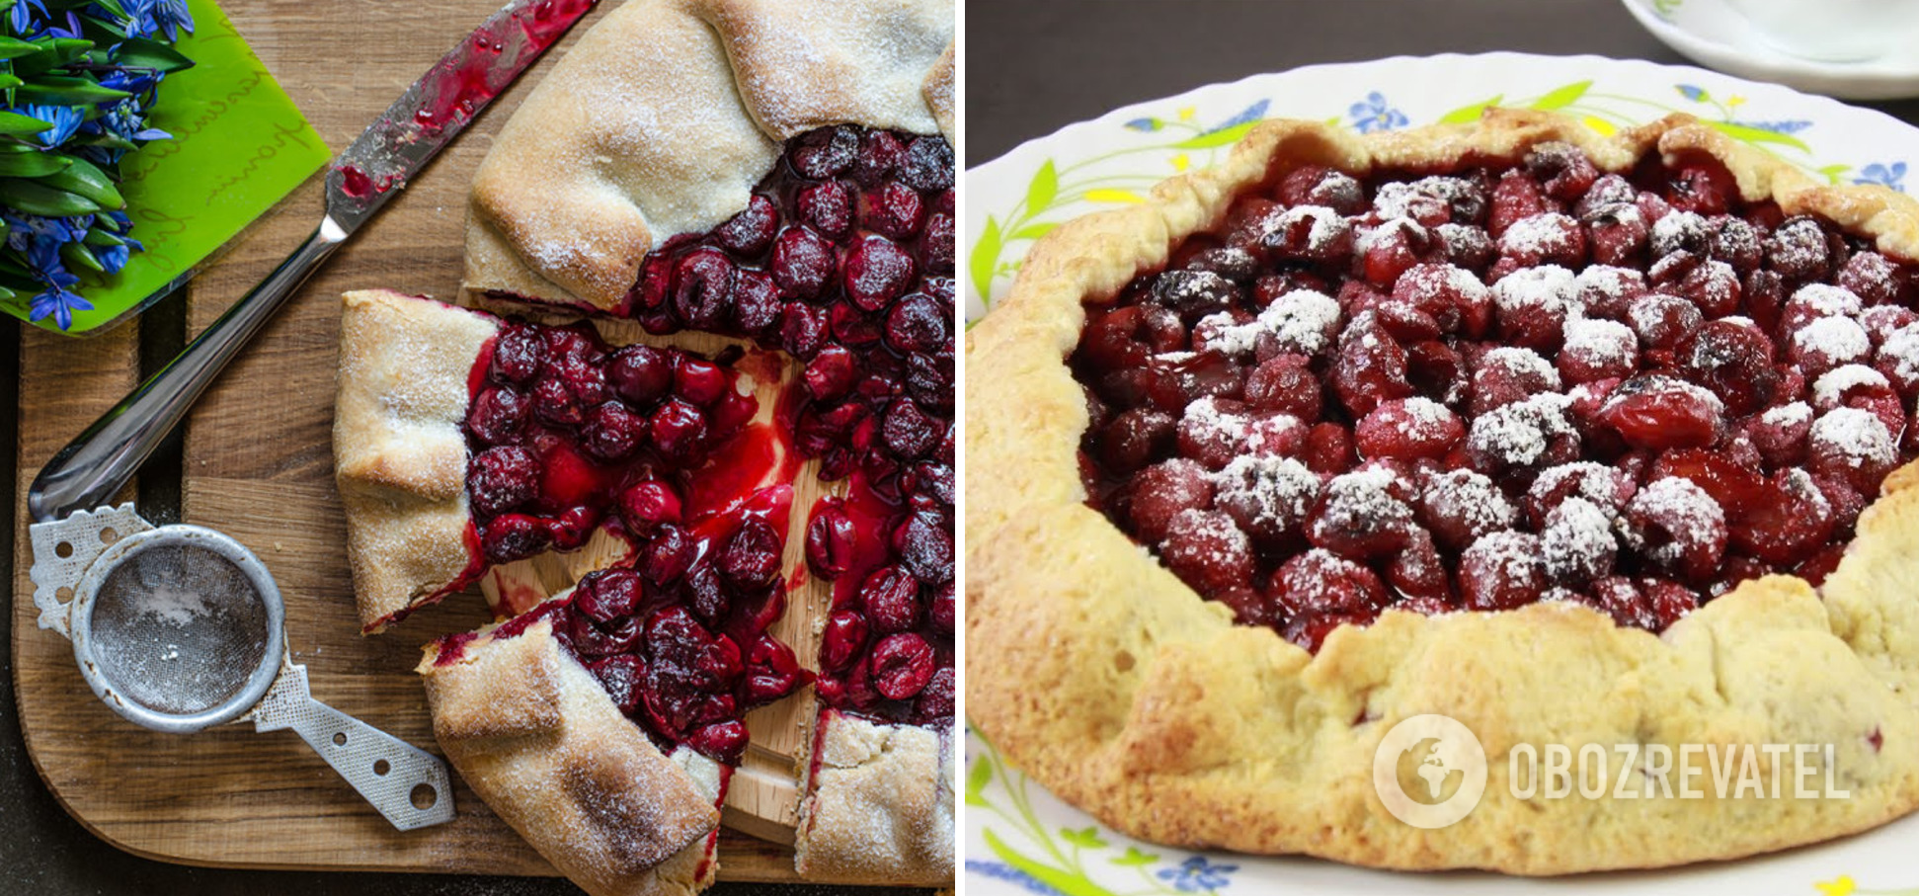 Galette with cherries